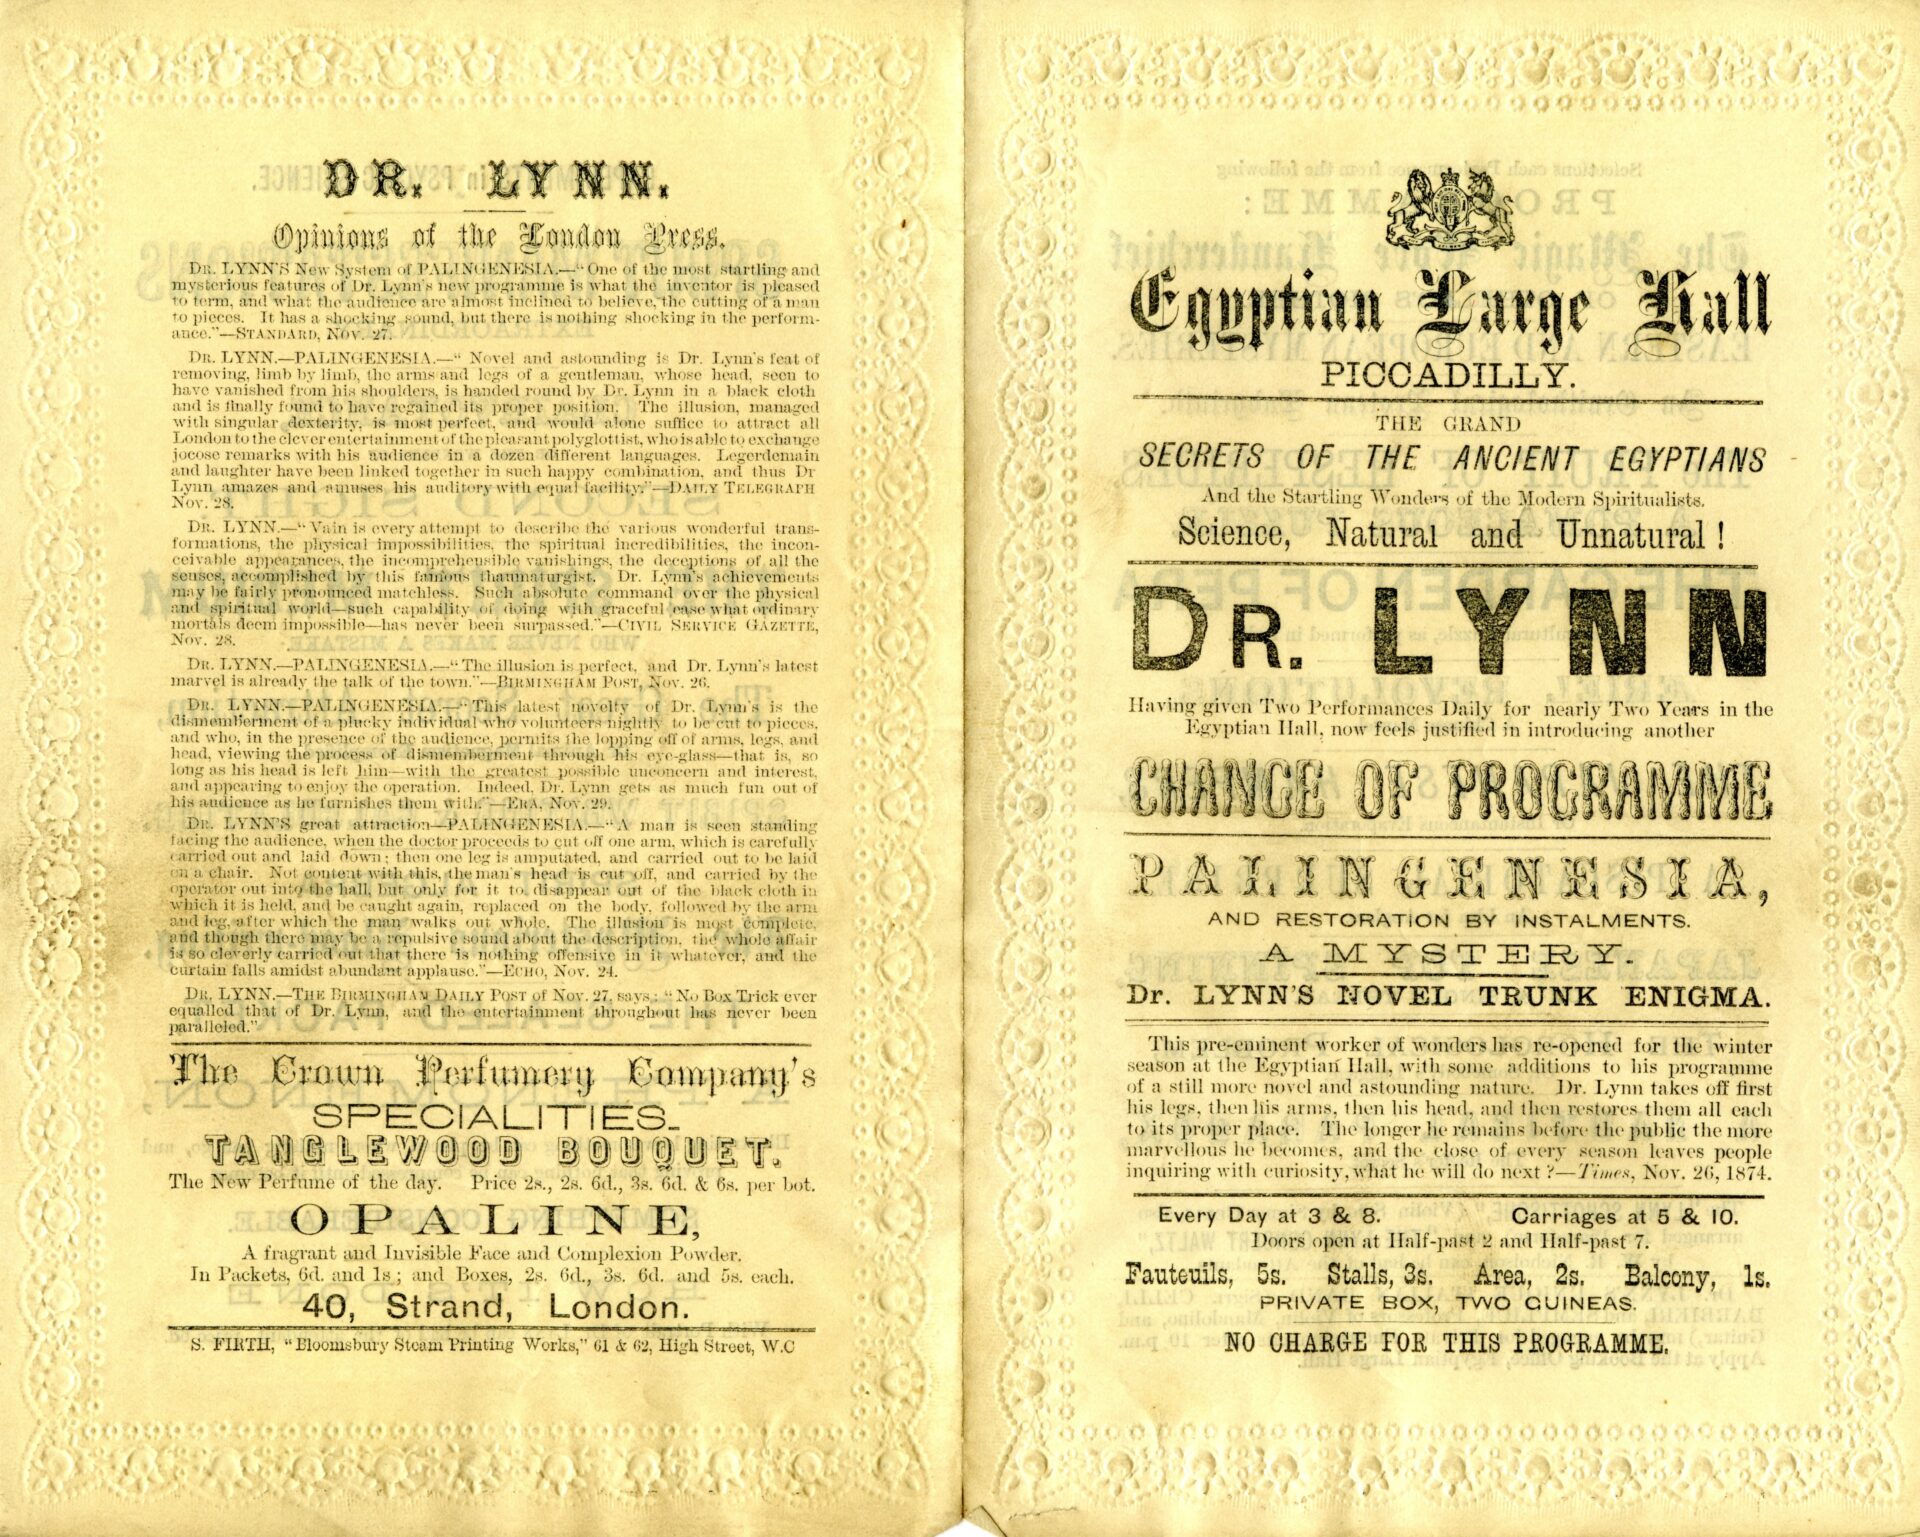 Programme for Dr Lynn at the Egyptian Hall